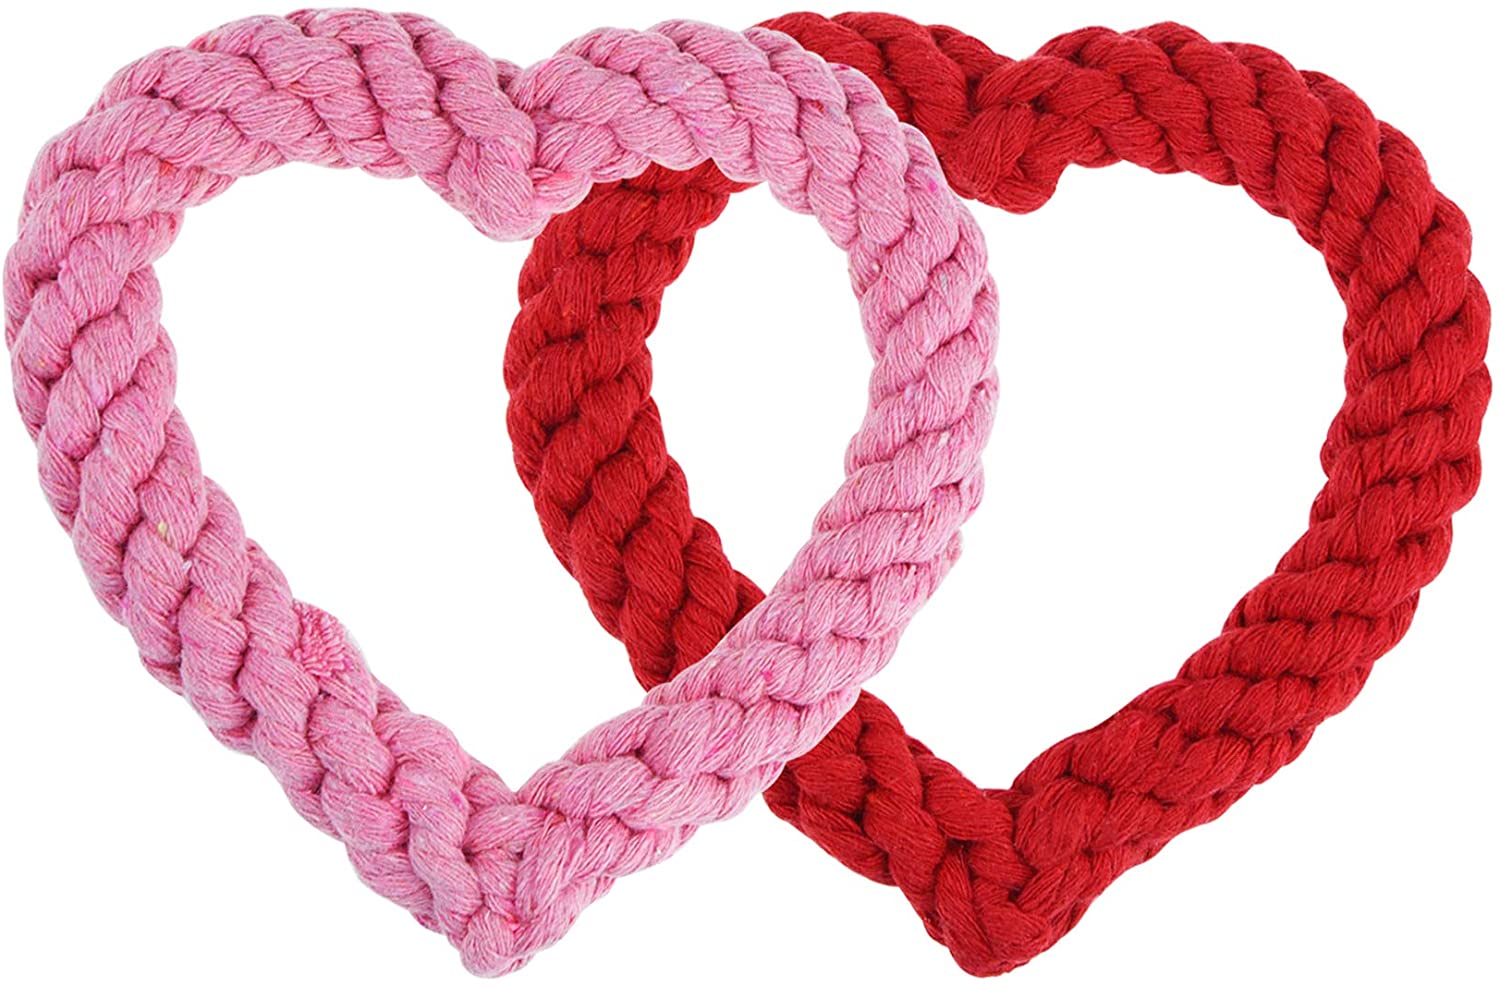 2 Pieces Valentine's Day Heart Shaped Rope